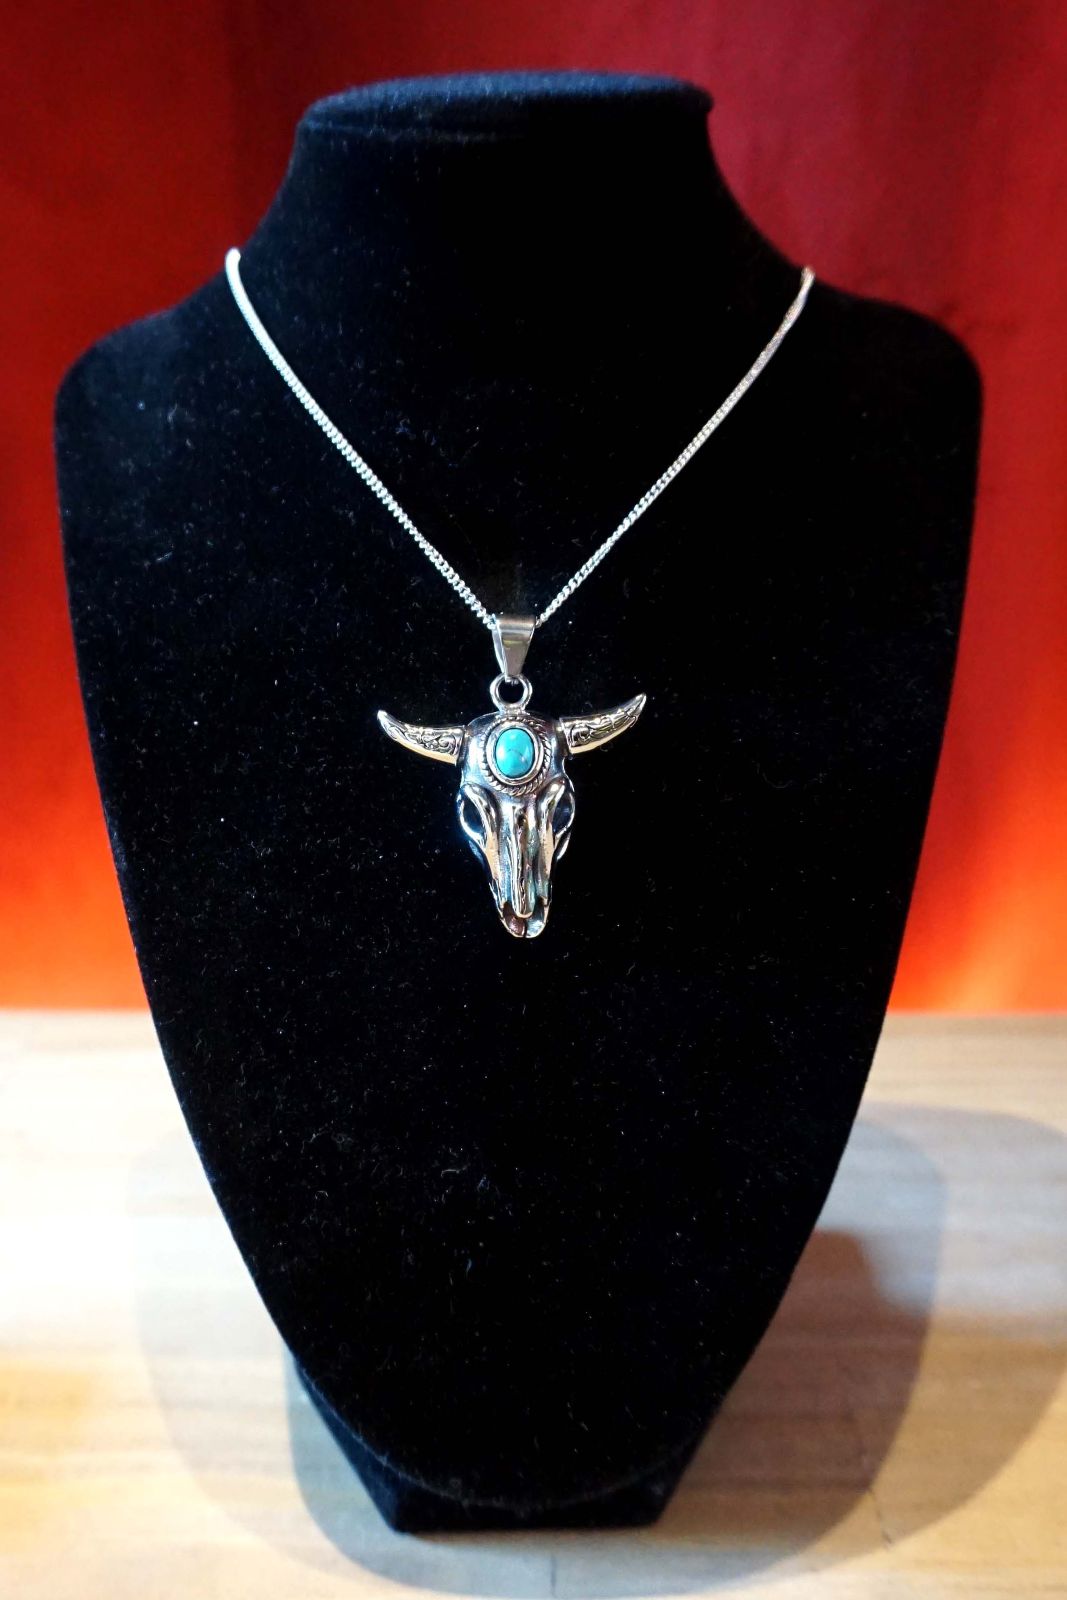 Bull head necklace silver turquoise